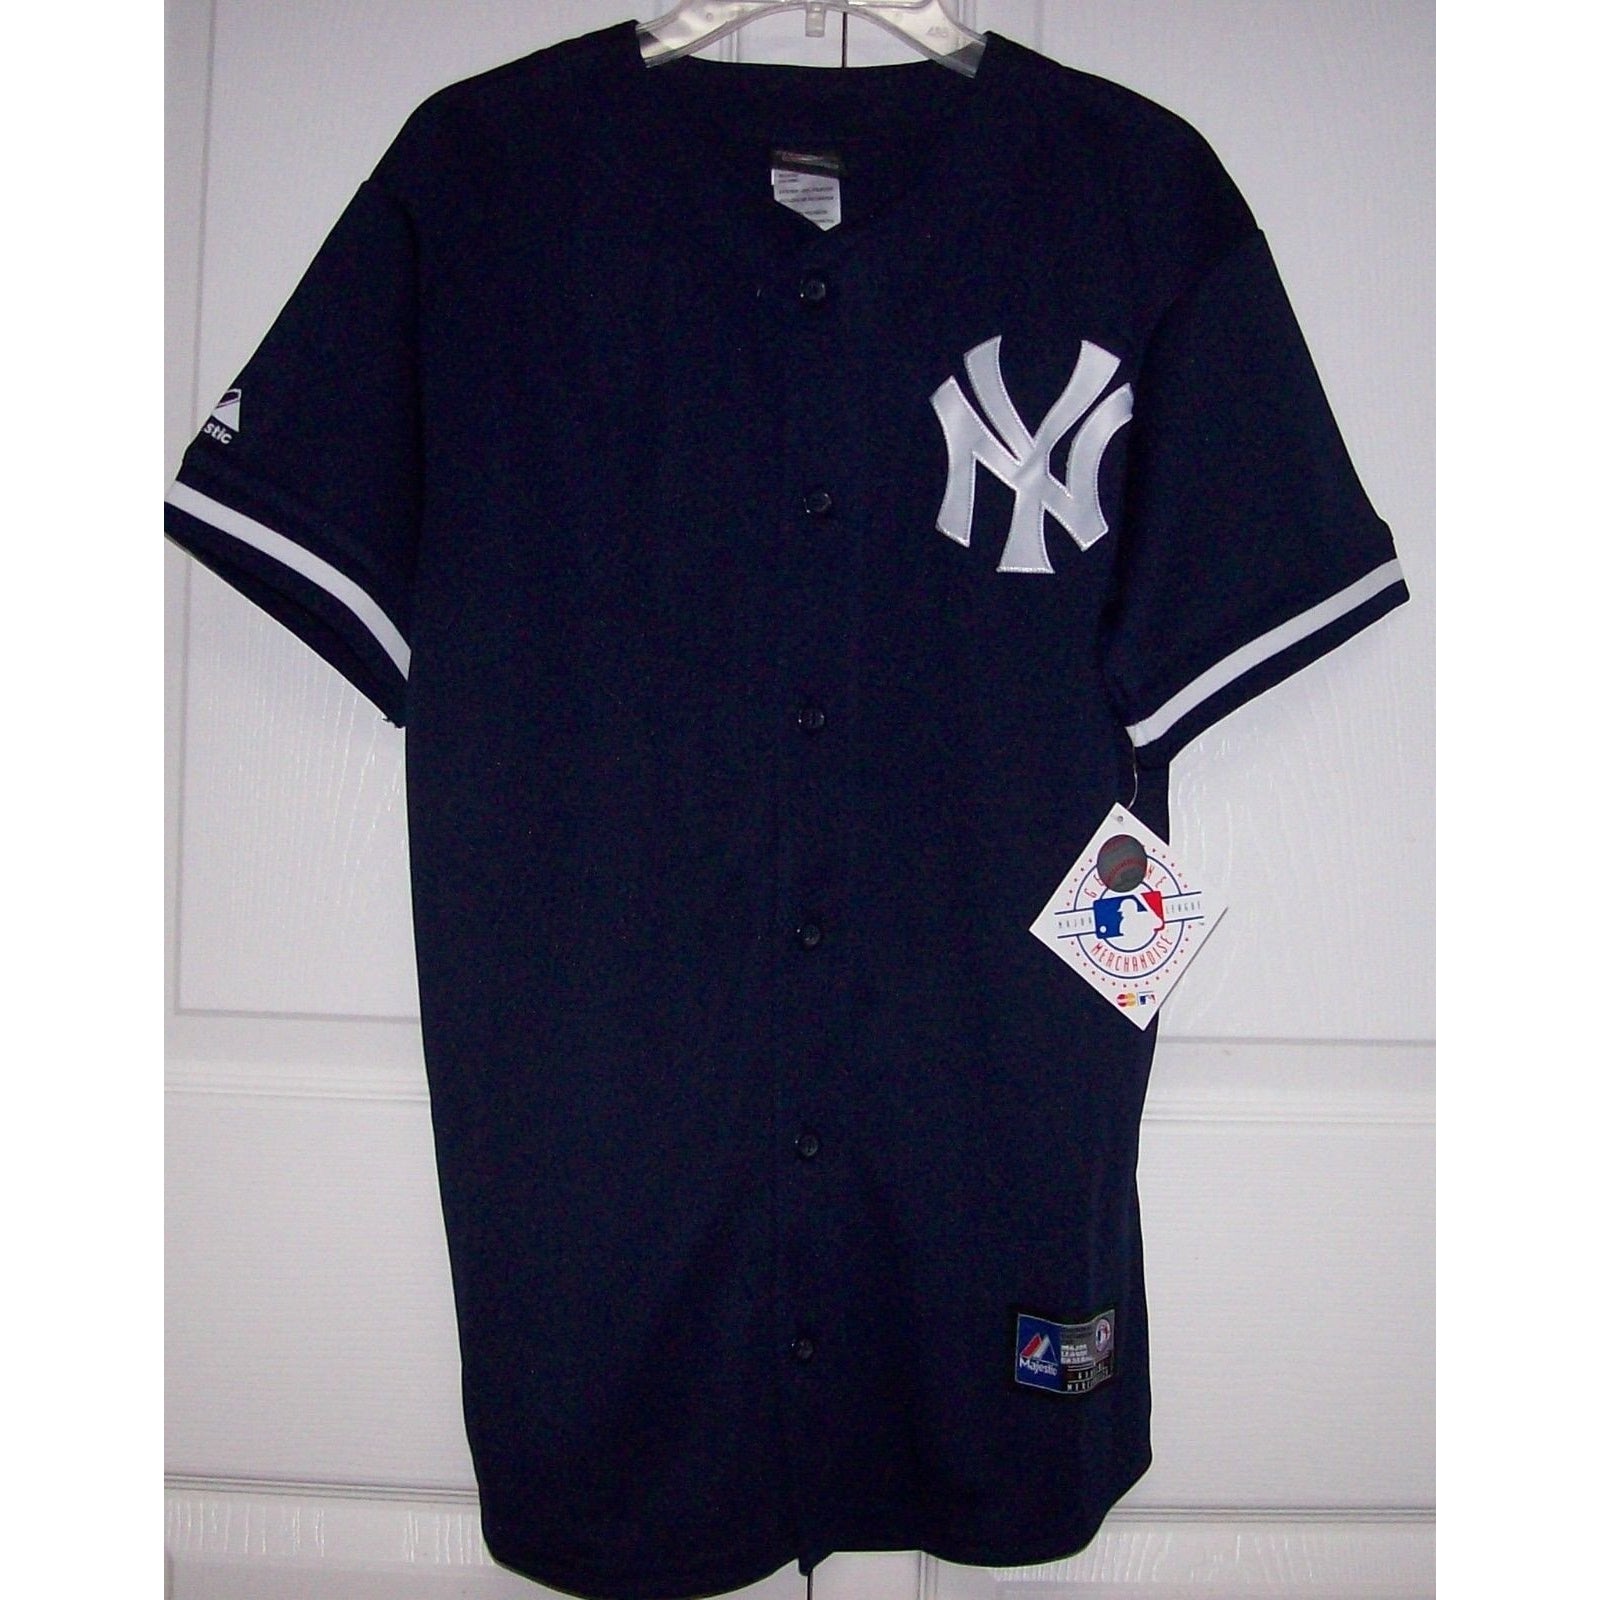 Yankees have a new per majestic mlb jerseys yankees fect role for